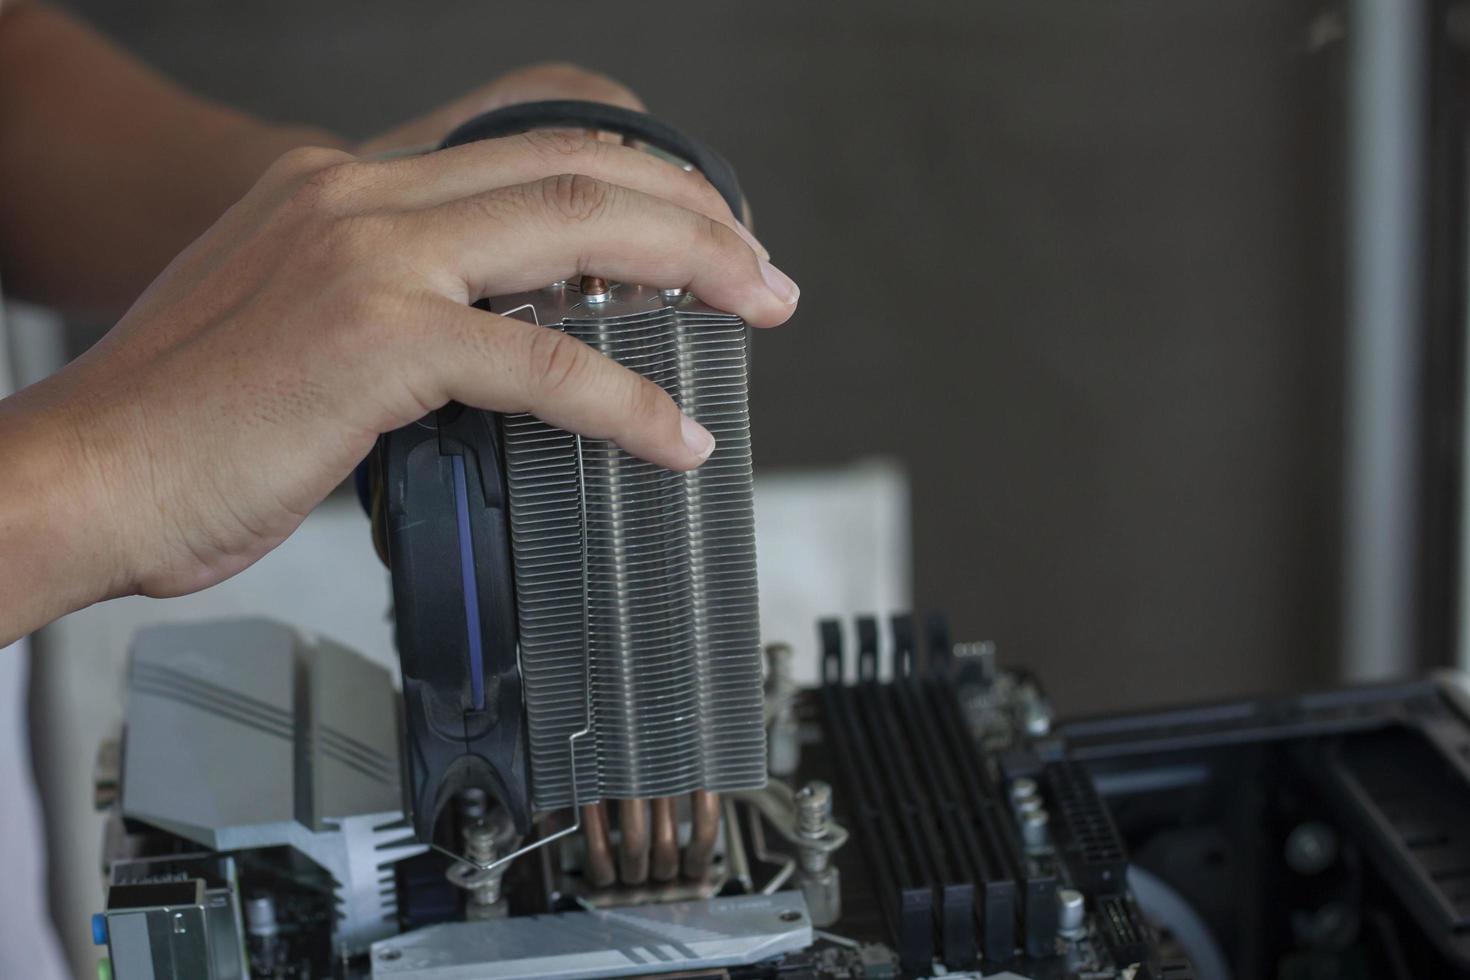 The hand of the technician is holding heat sink to repair the computer. photo